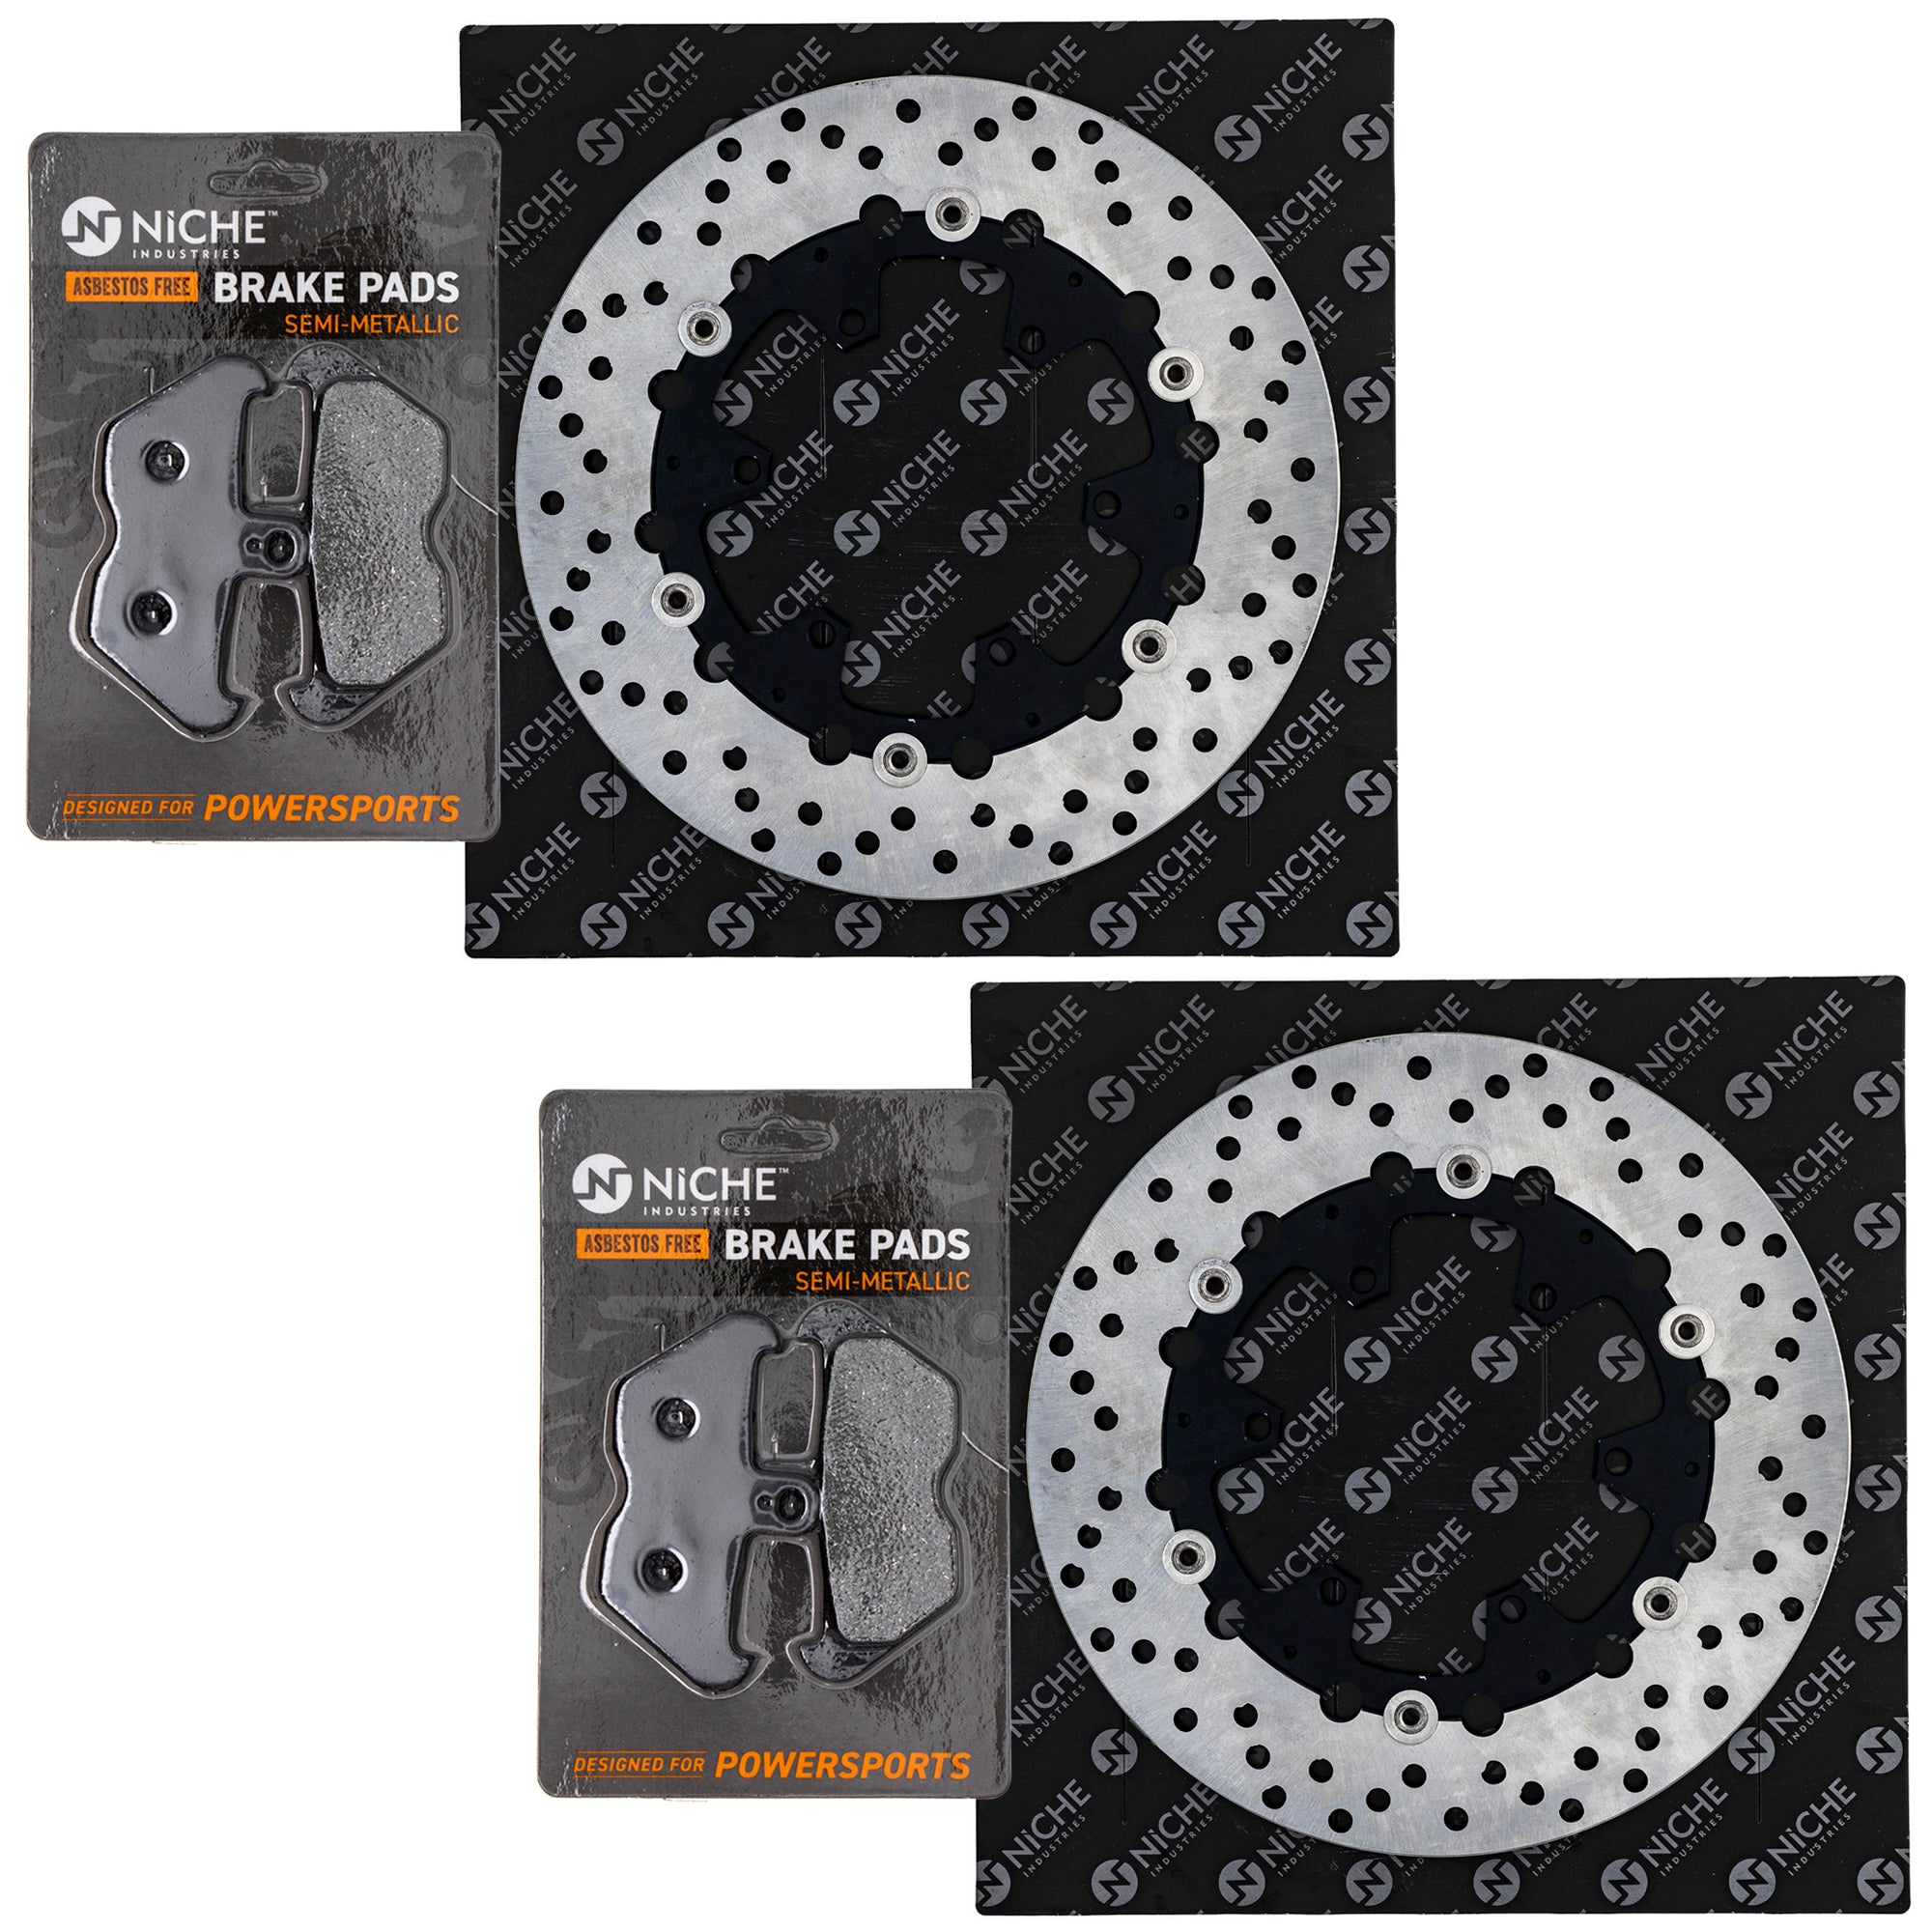 Rotor & Brake Pad Kit for zOTHER BMW R850R R1100RT R1100RS R1100R NICHE MK1008092